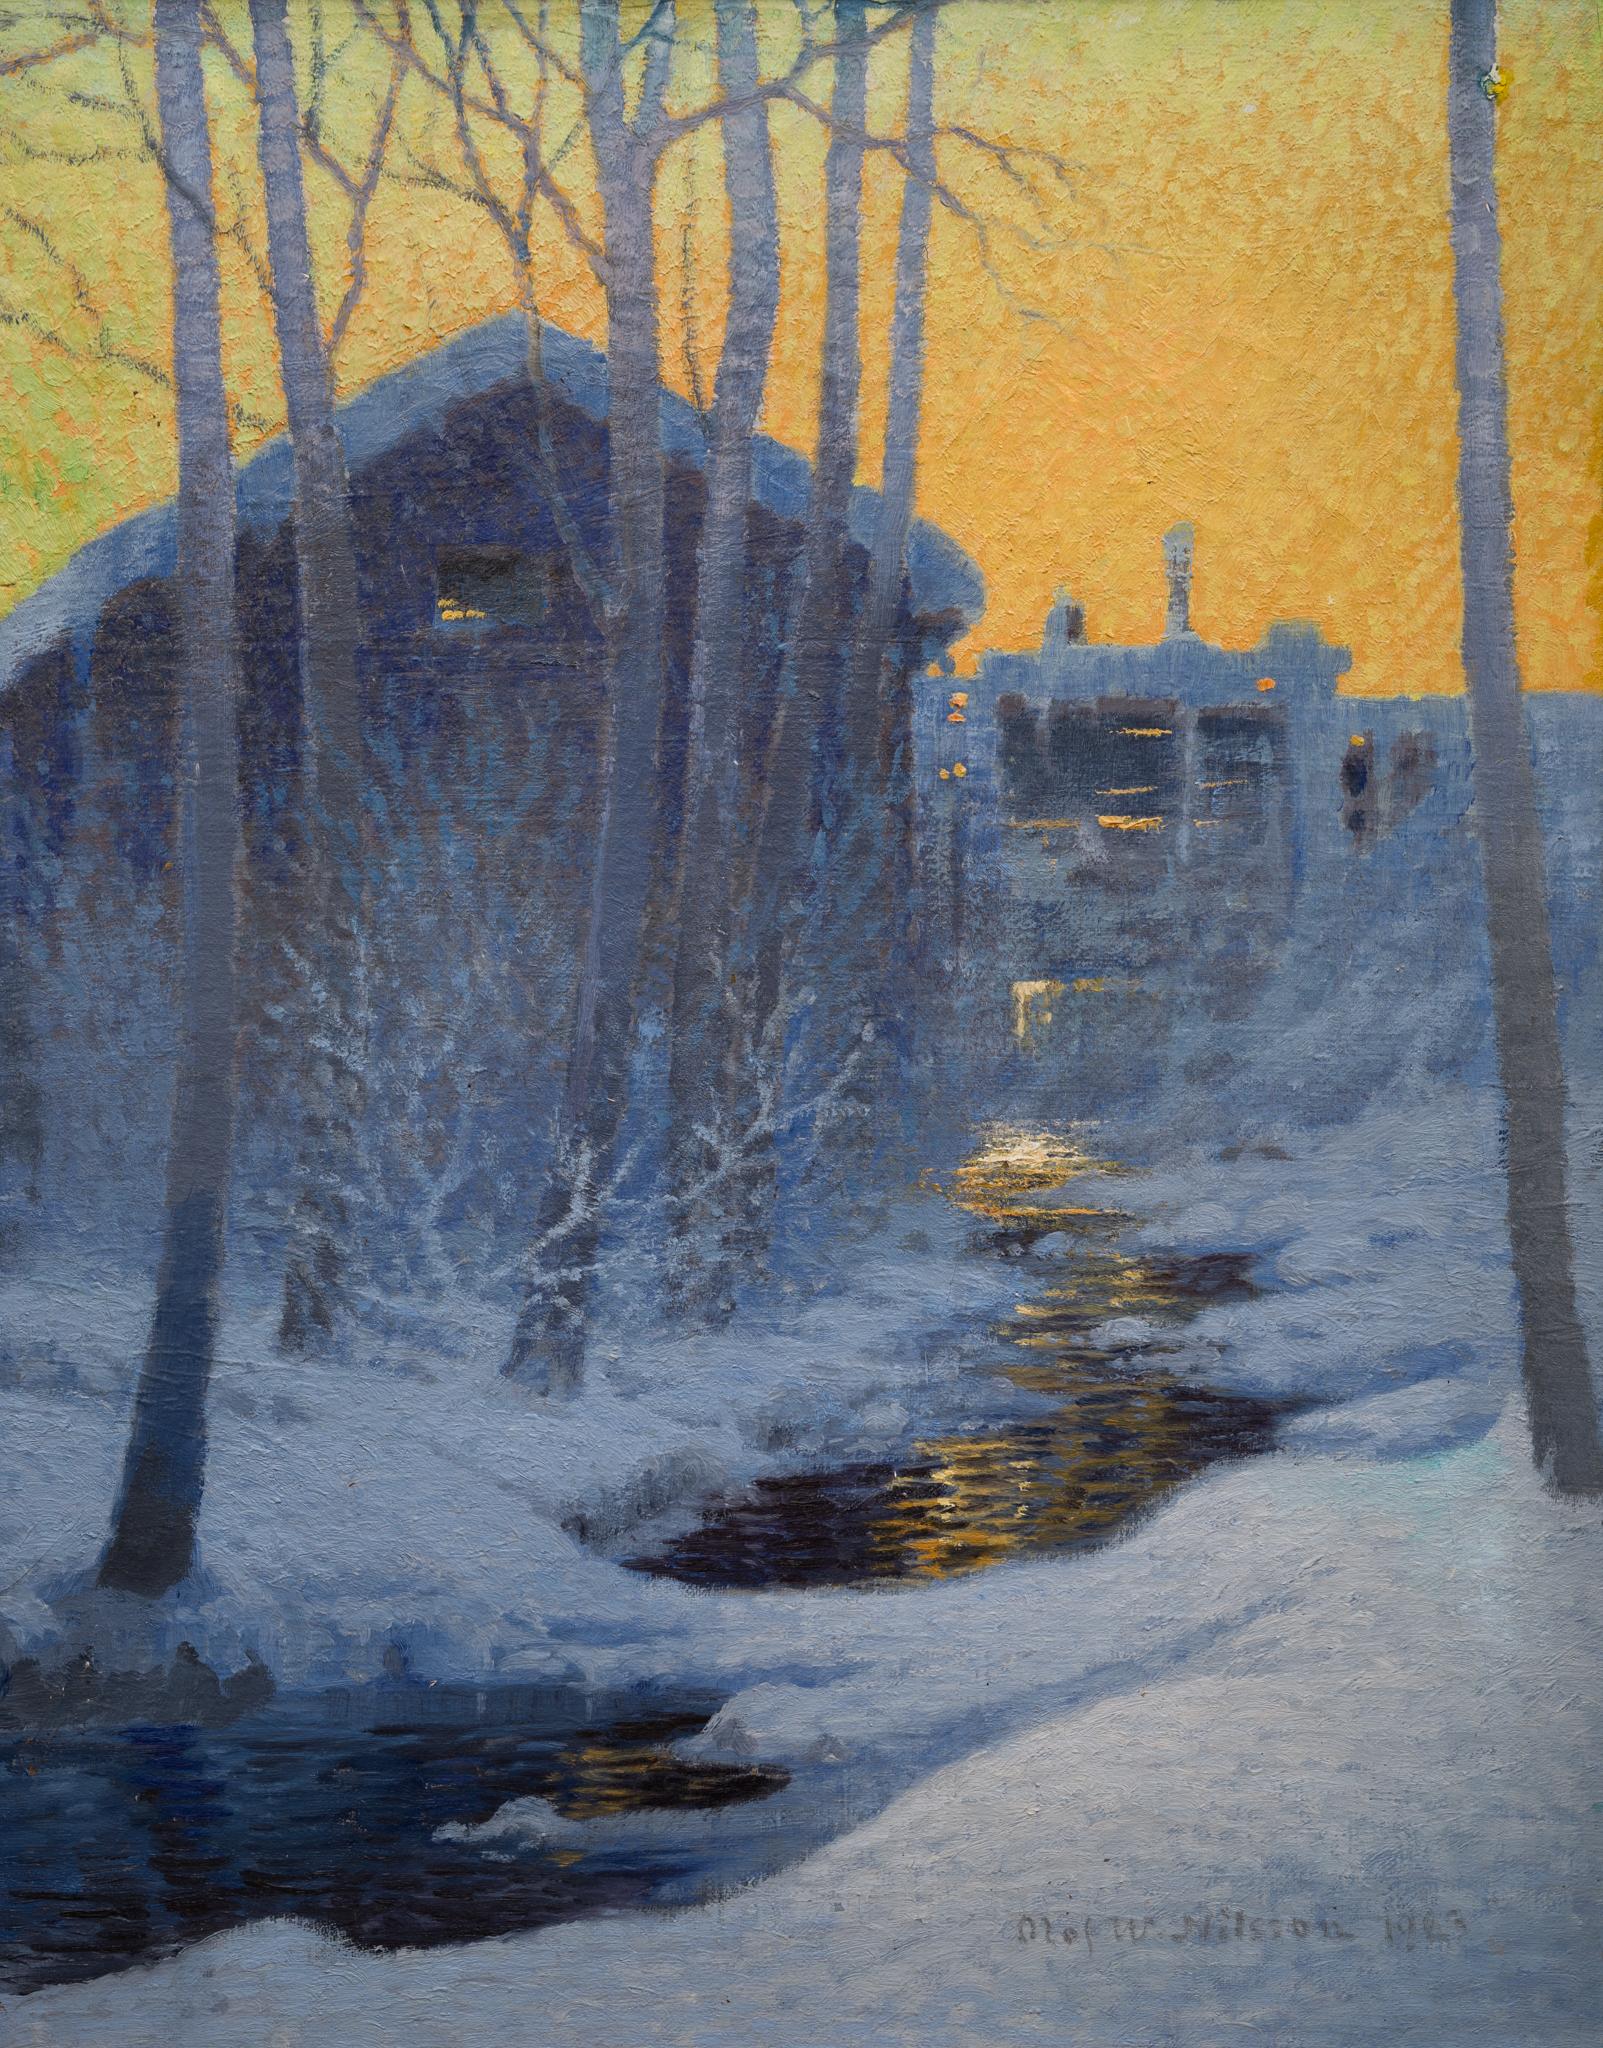 Our painting "Winter Evening at the Mill," created by the Swedish painter Olof Walfrid Nilsson, offers a serene and evocative depiction of a winter landscape. Born on October 12, 1868, in Norra Råda socken, Värmland, and passing away on February 23,